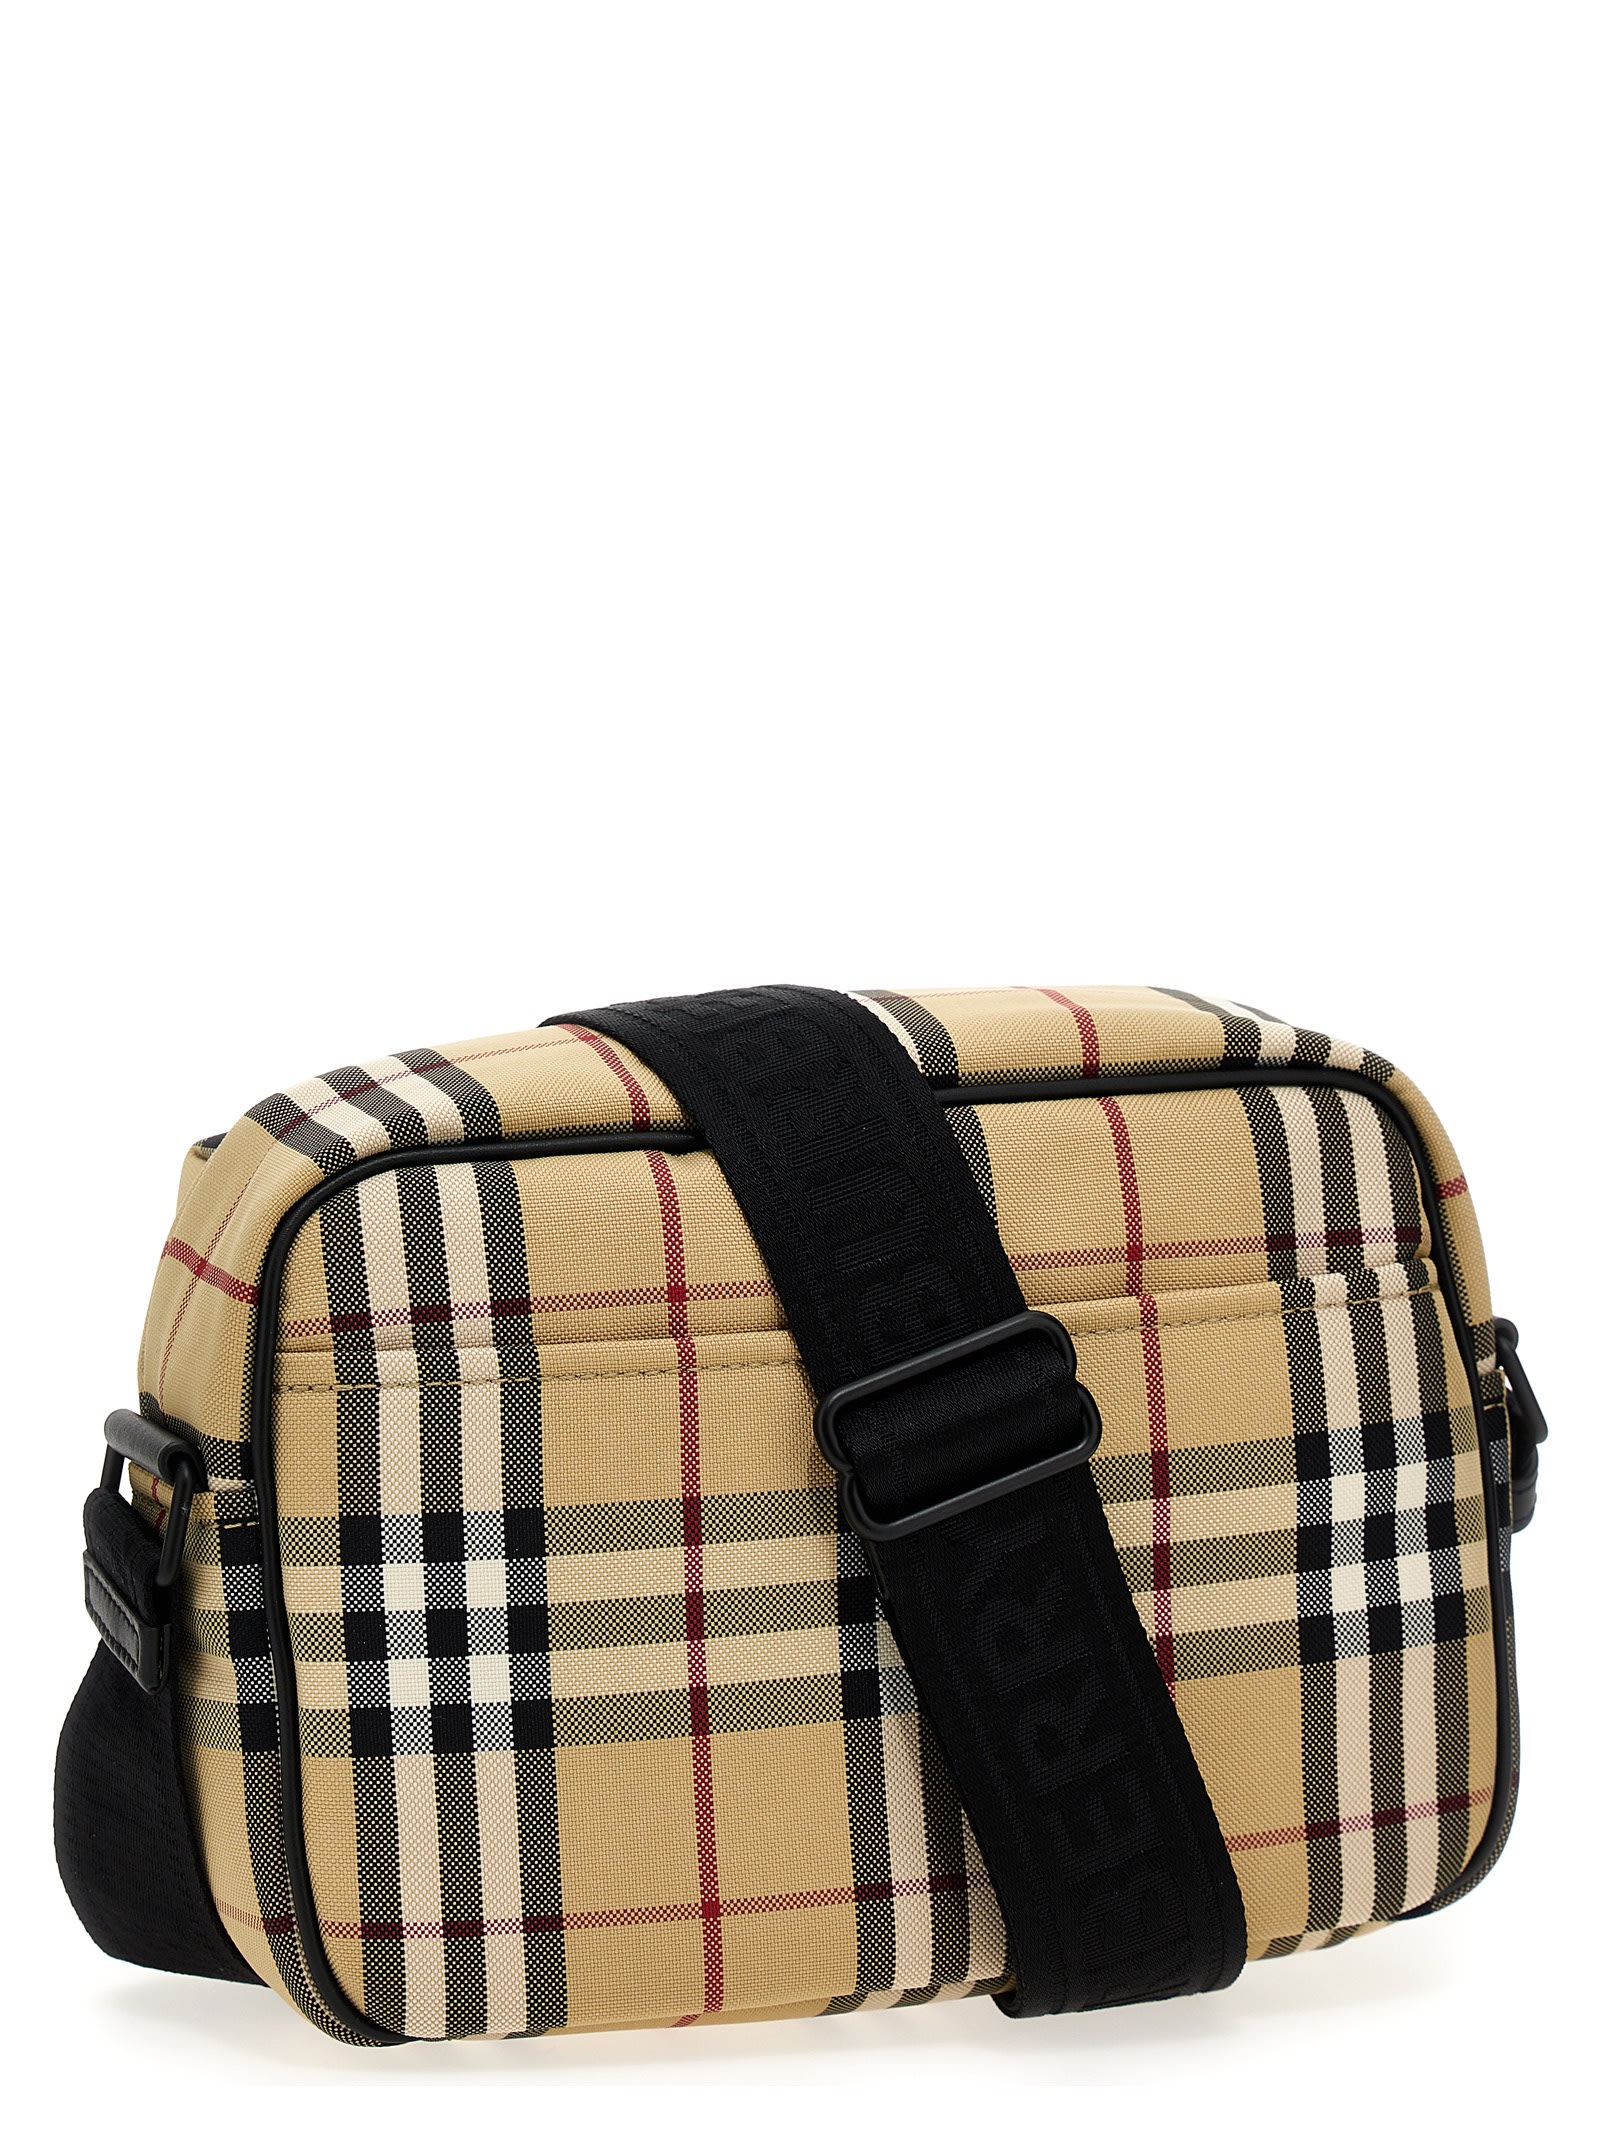 Paddy Checked Crossbody Bag in Brown - Burberry